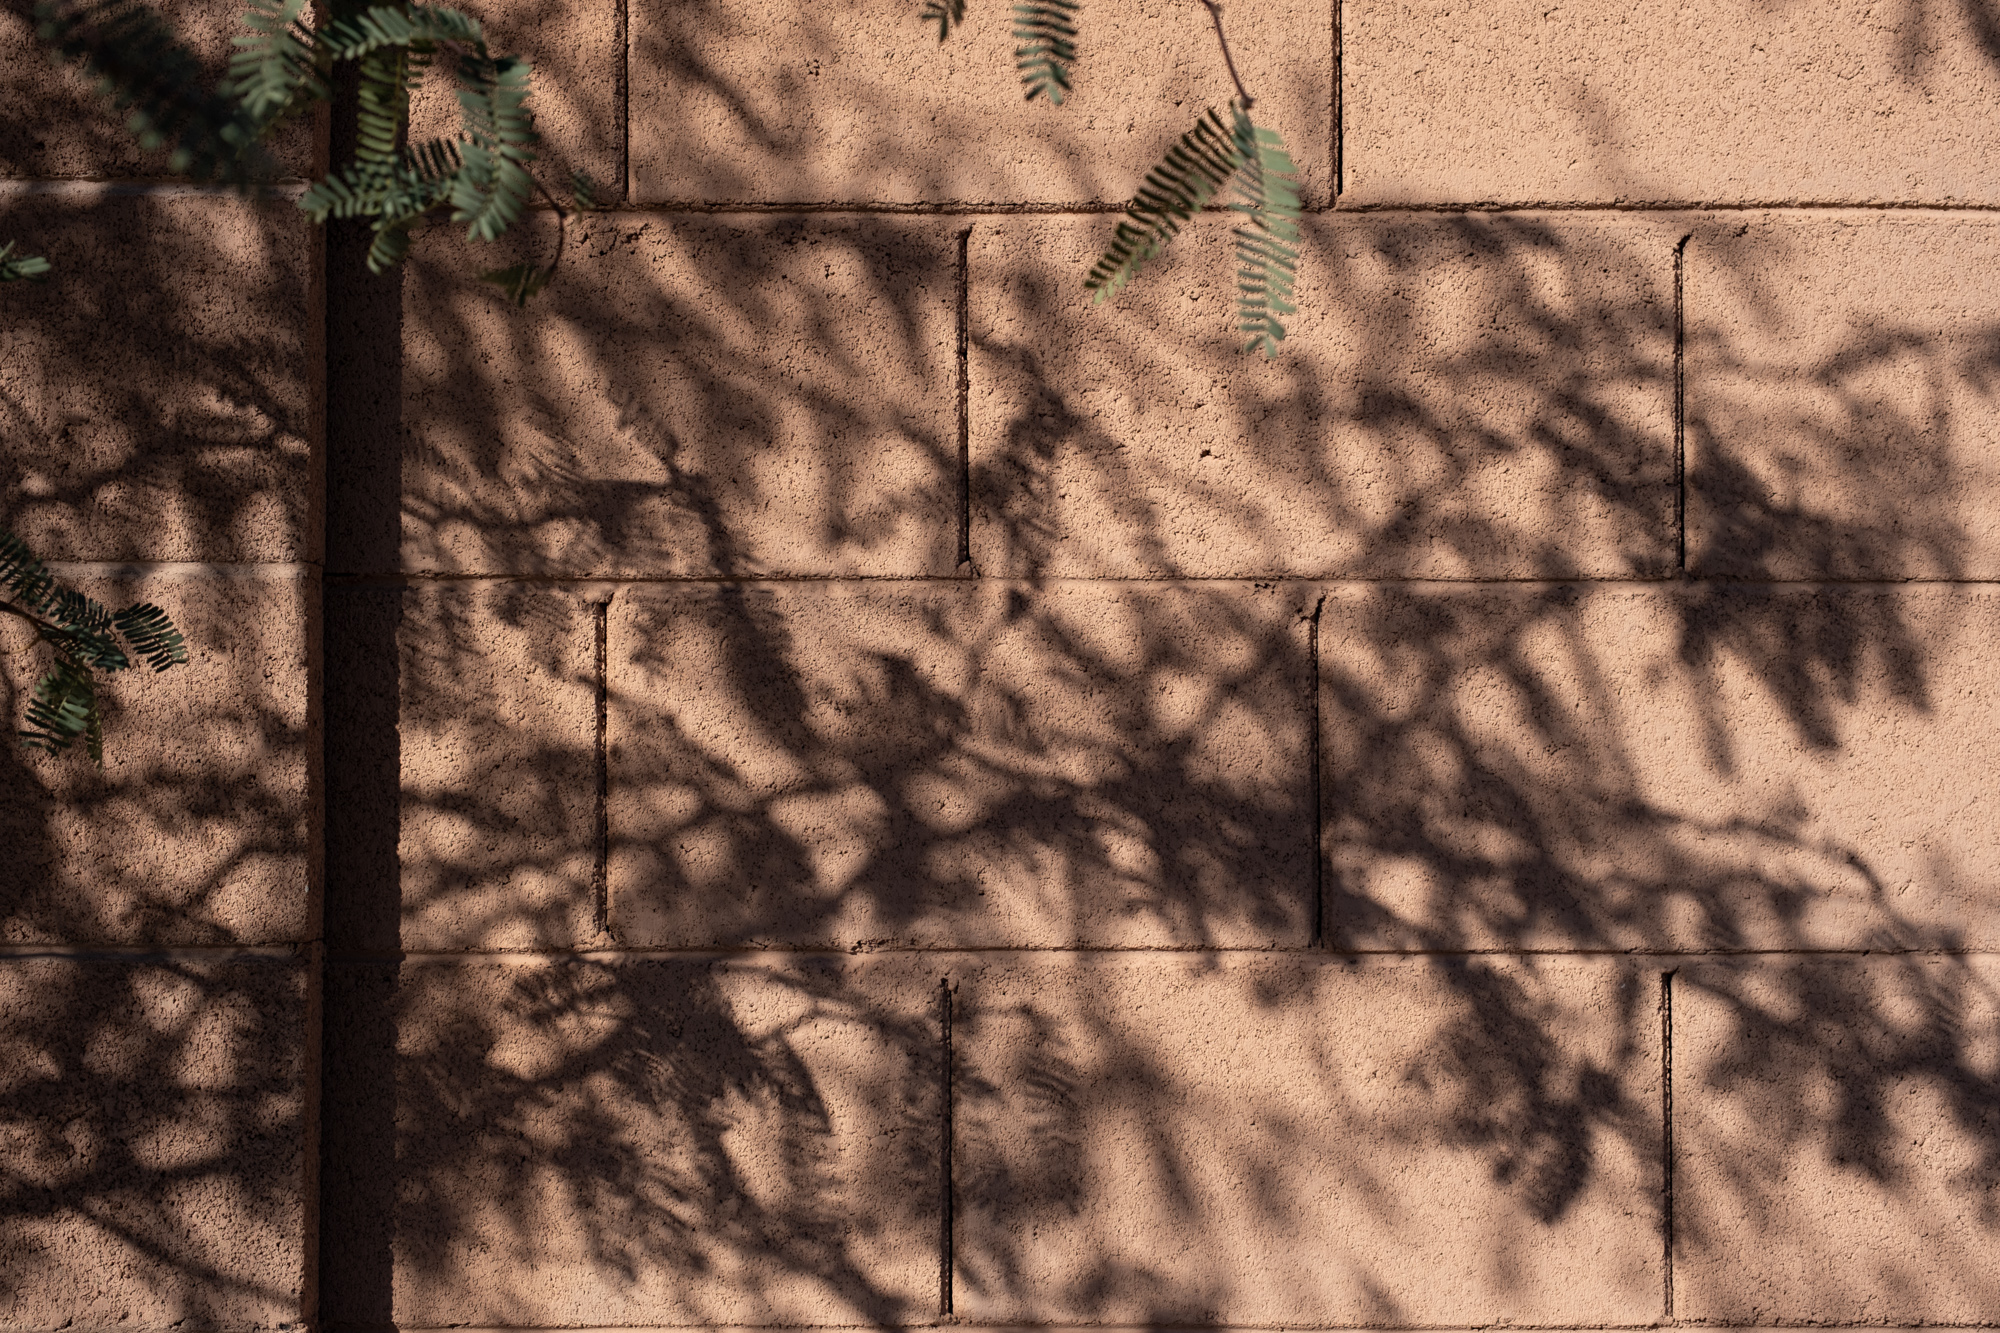 A photo of the shadows of a tree's leaves on an orange wall.